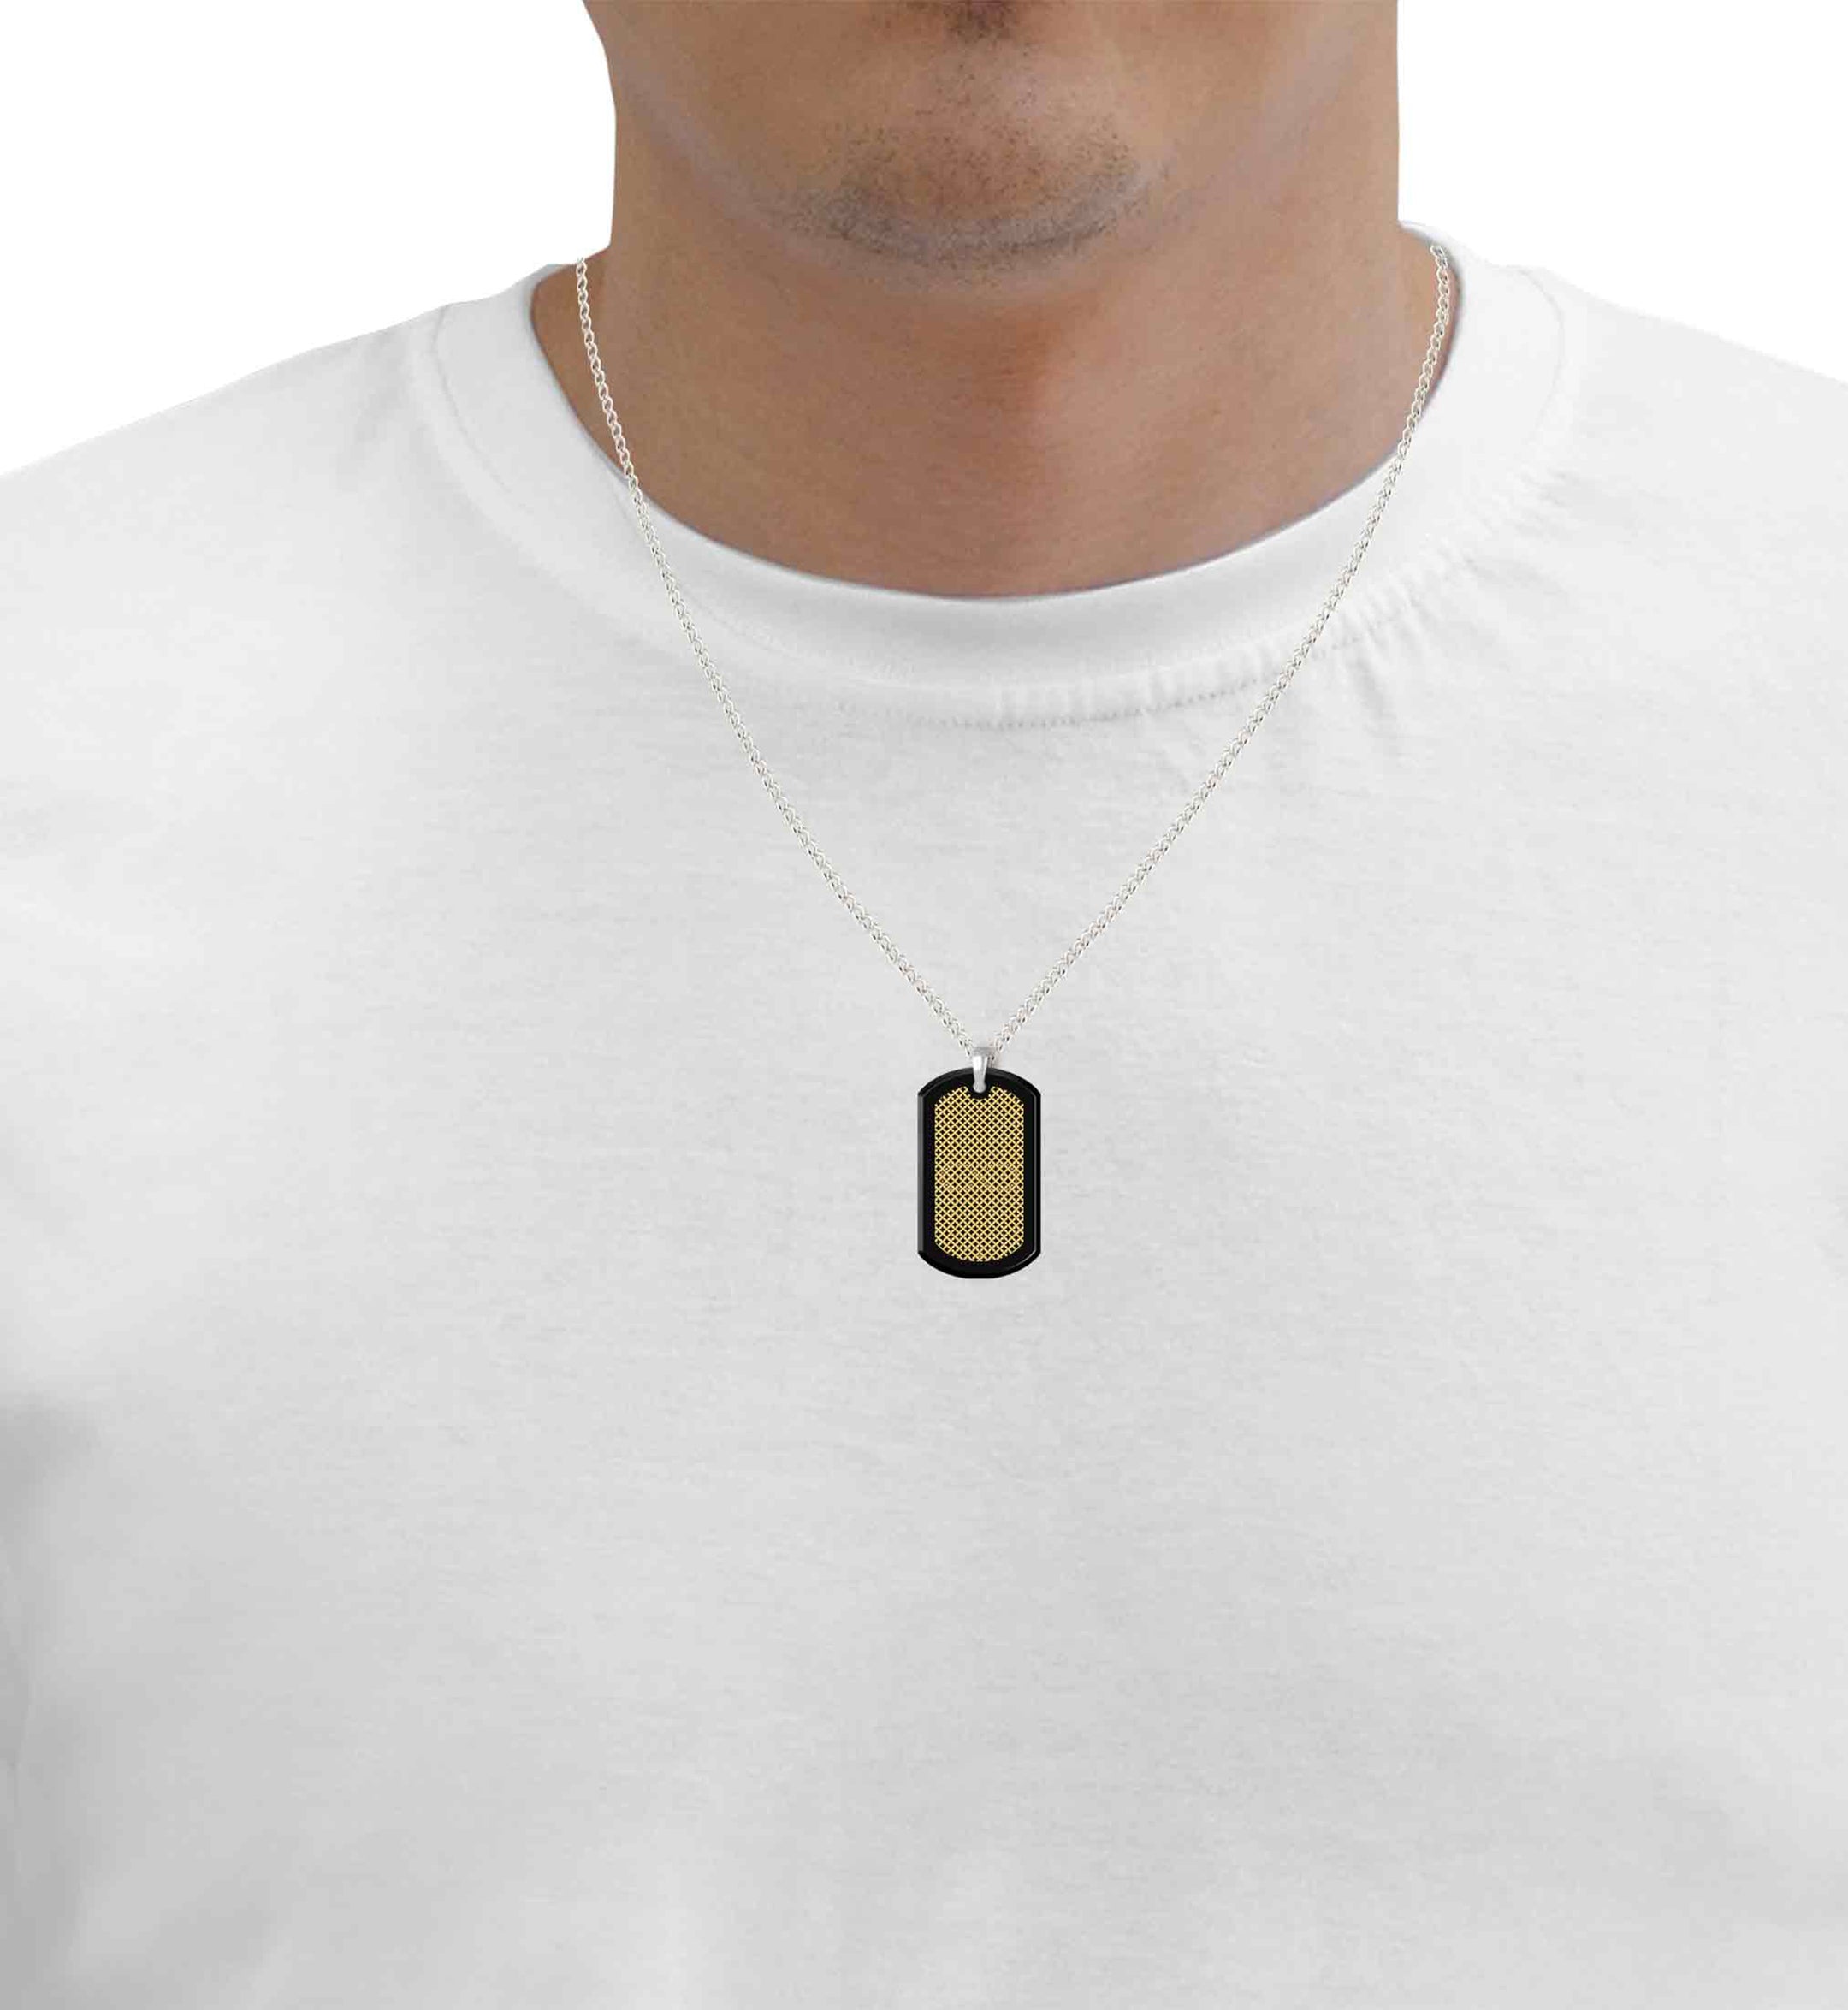 Men’s Dog Tag Necklace Infinity Pendant 24k Gold Inscribed Onyx Stone with a geometric pattern displayed frontally.